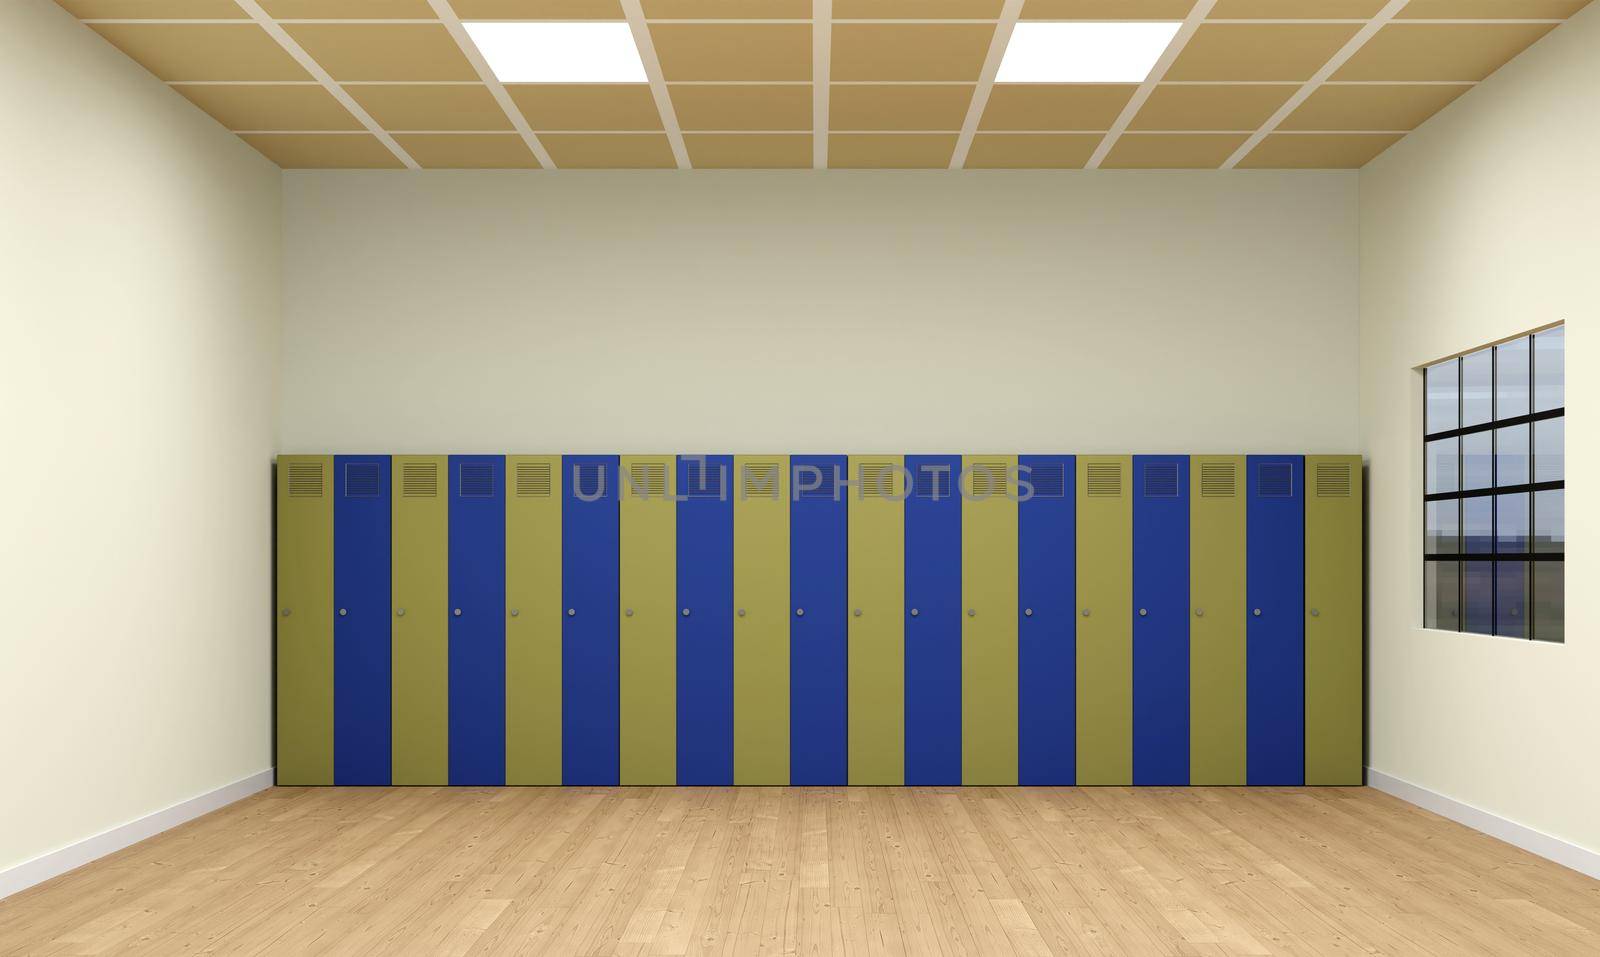 Colorful wooden numbered Student locker in modern empty classroom concept 3D illustration. by raferto1973